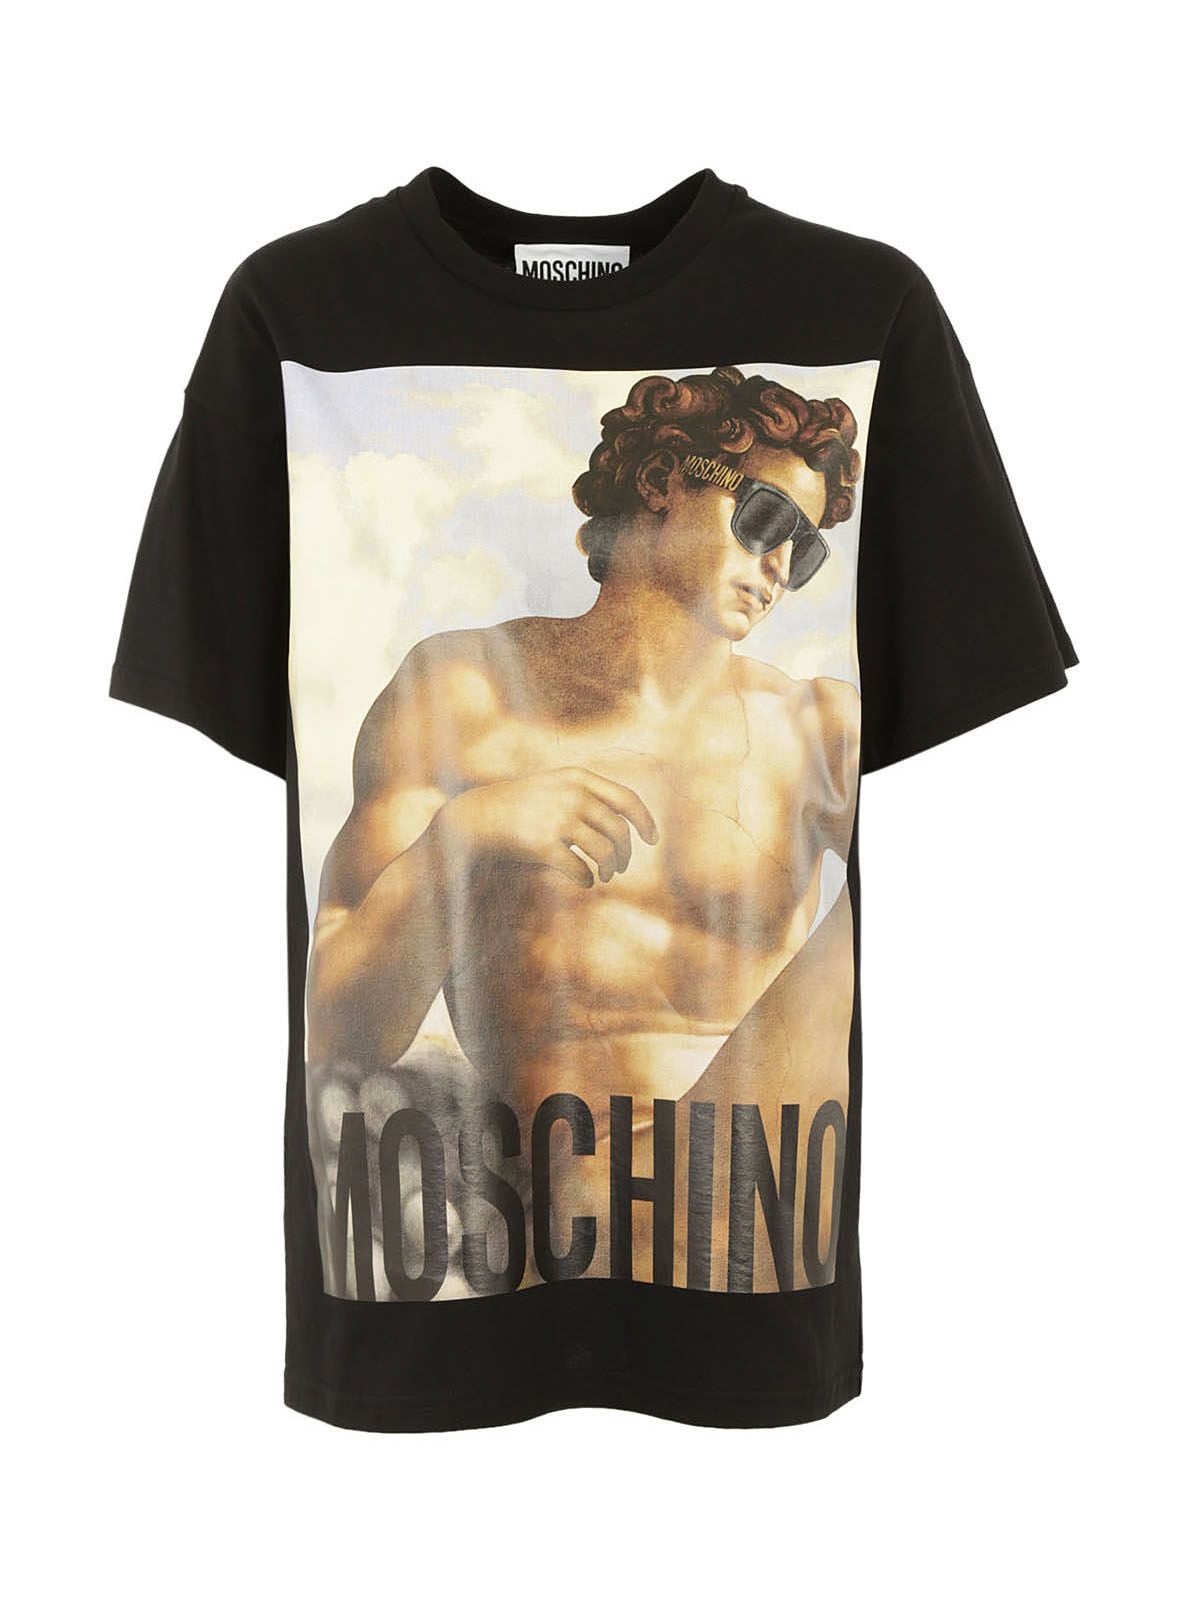 MOSCHINO Painting-Print Cotton-Jersey T-Shirt in Black | ModeSens